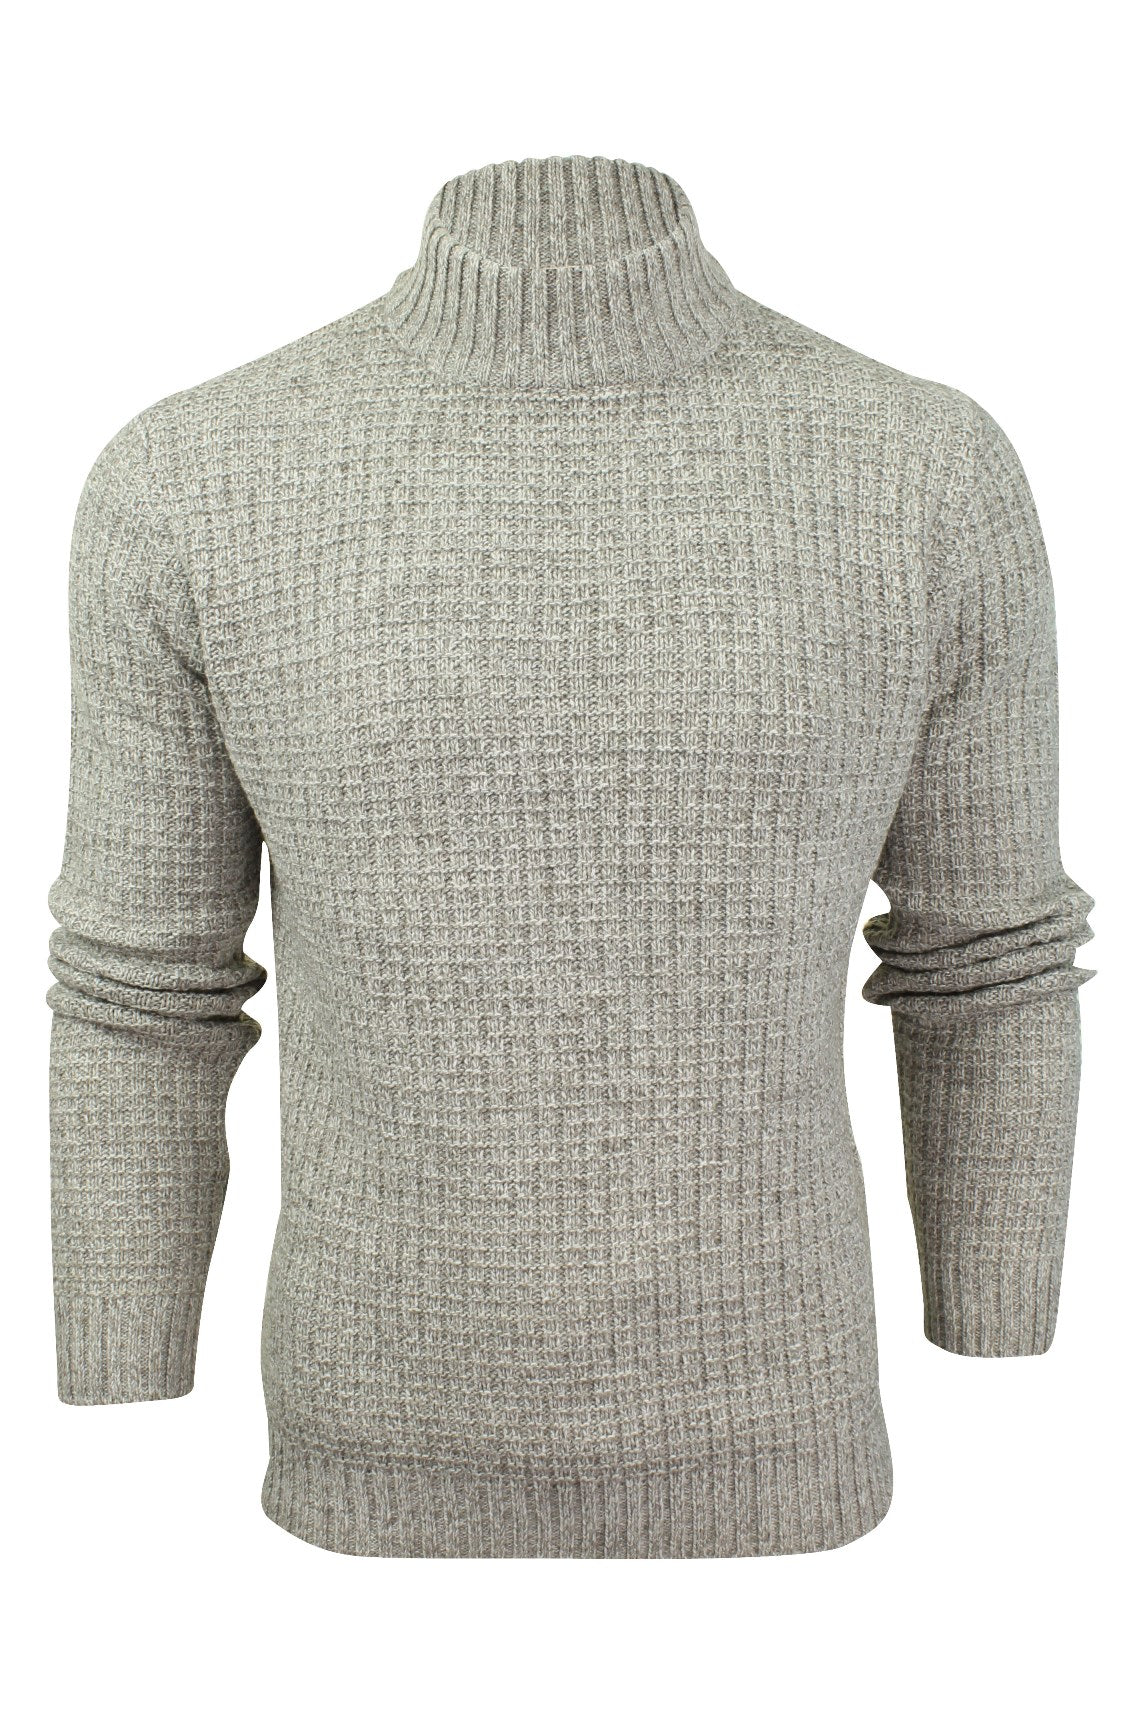 Xact Mens Textured Knit Turtle Neck Jumper-Main Image